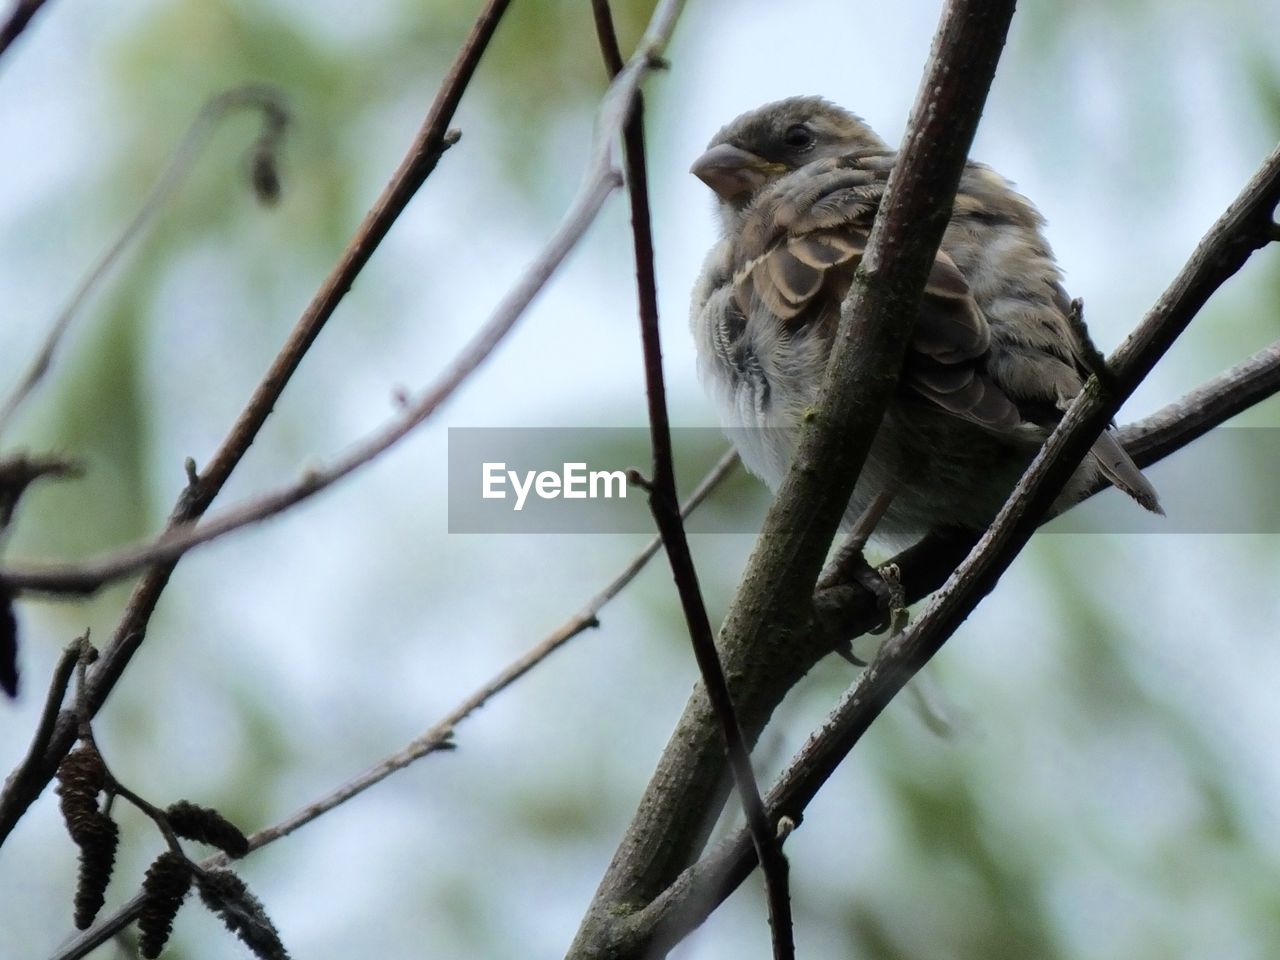 LOW ANGLE VIEW OF BIRD ON BRANCH AGAINST BLURRED PLANTS